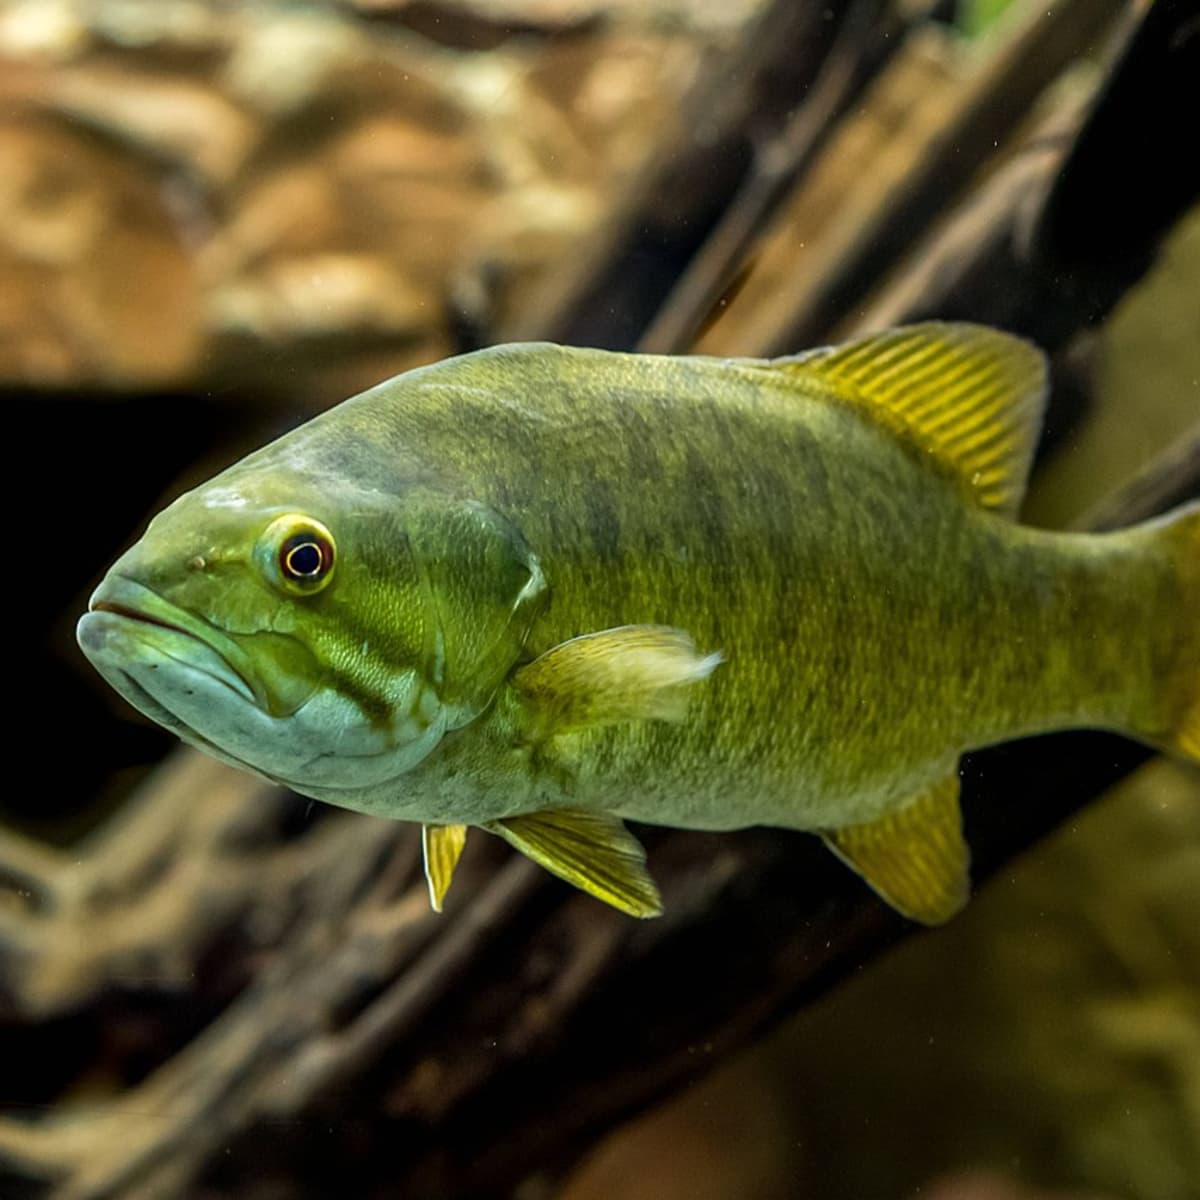 Can You Keep Wild Fish as Pets Legally in Your Home Aquarium? - PetHelpful